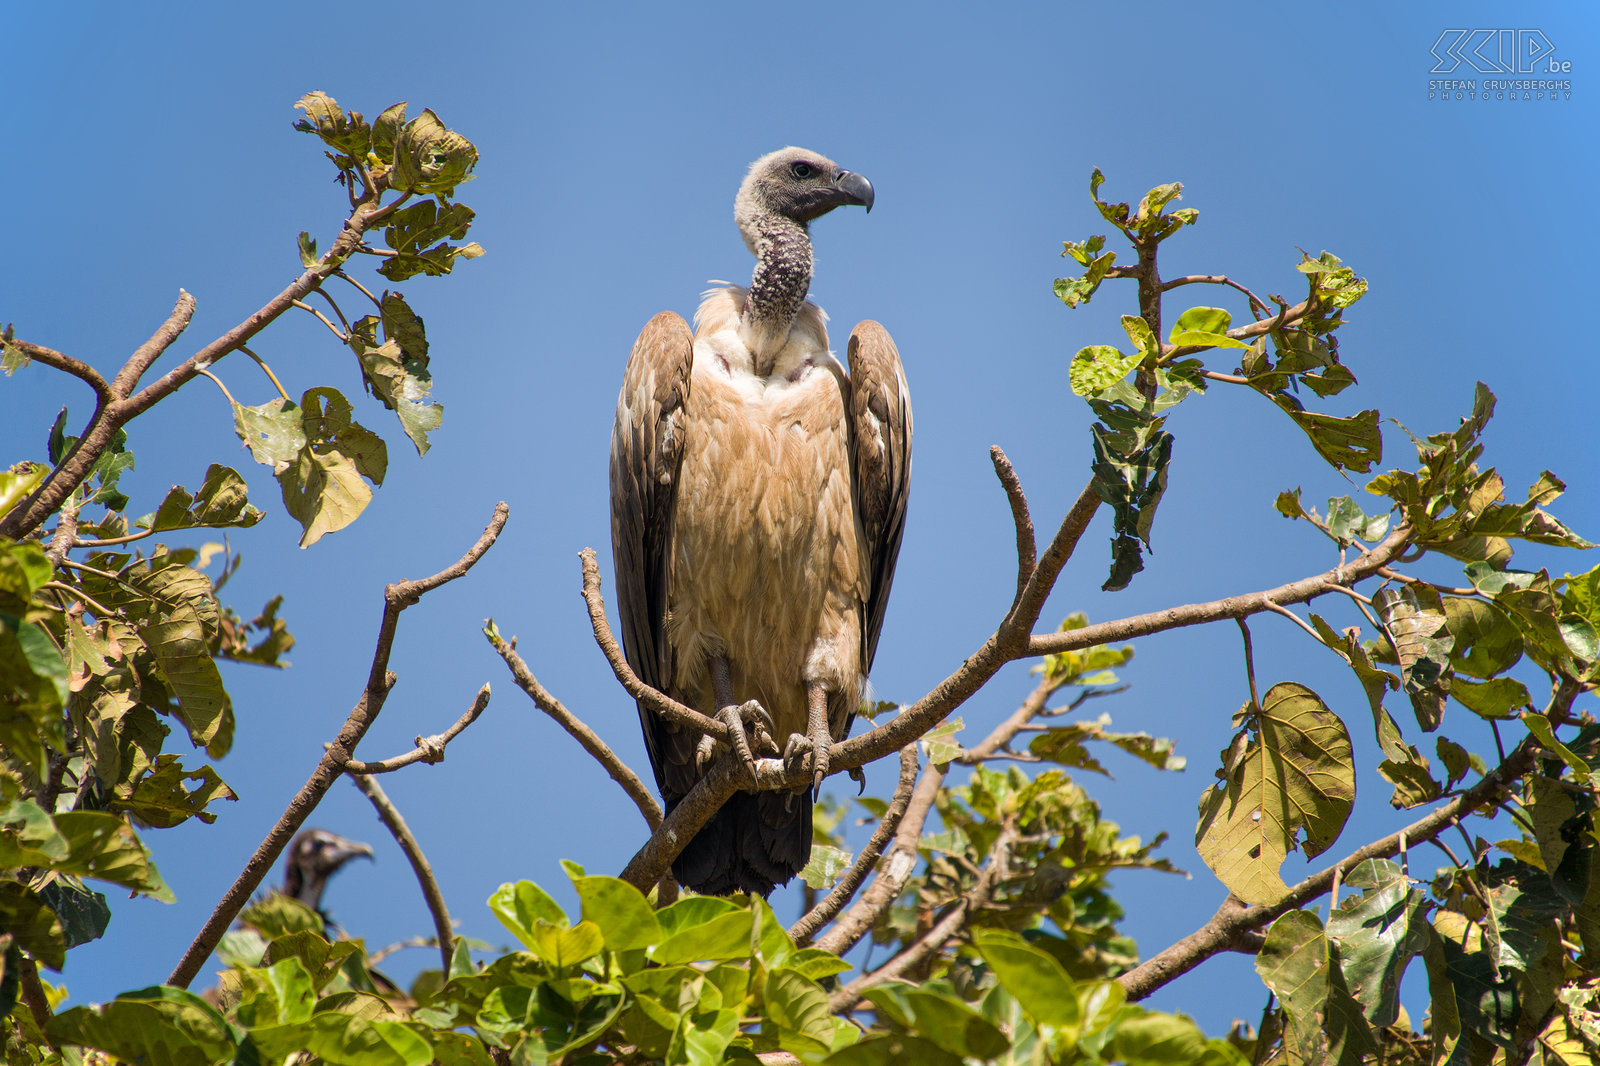 Bahir Dar - Rüppell's Griffon Vulture En route to the Blue Nile Falls we saw a lot of vultures including this Rüppell's Griffon Vulture (Gyps rueppellii). Stefan Cruysberghs